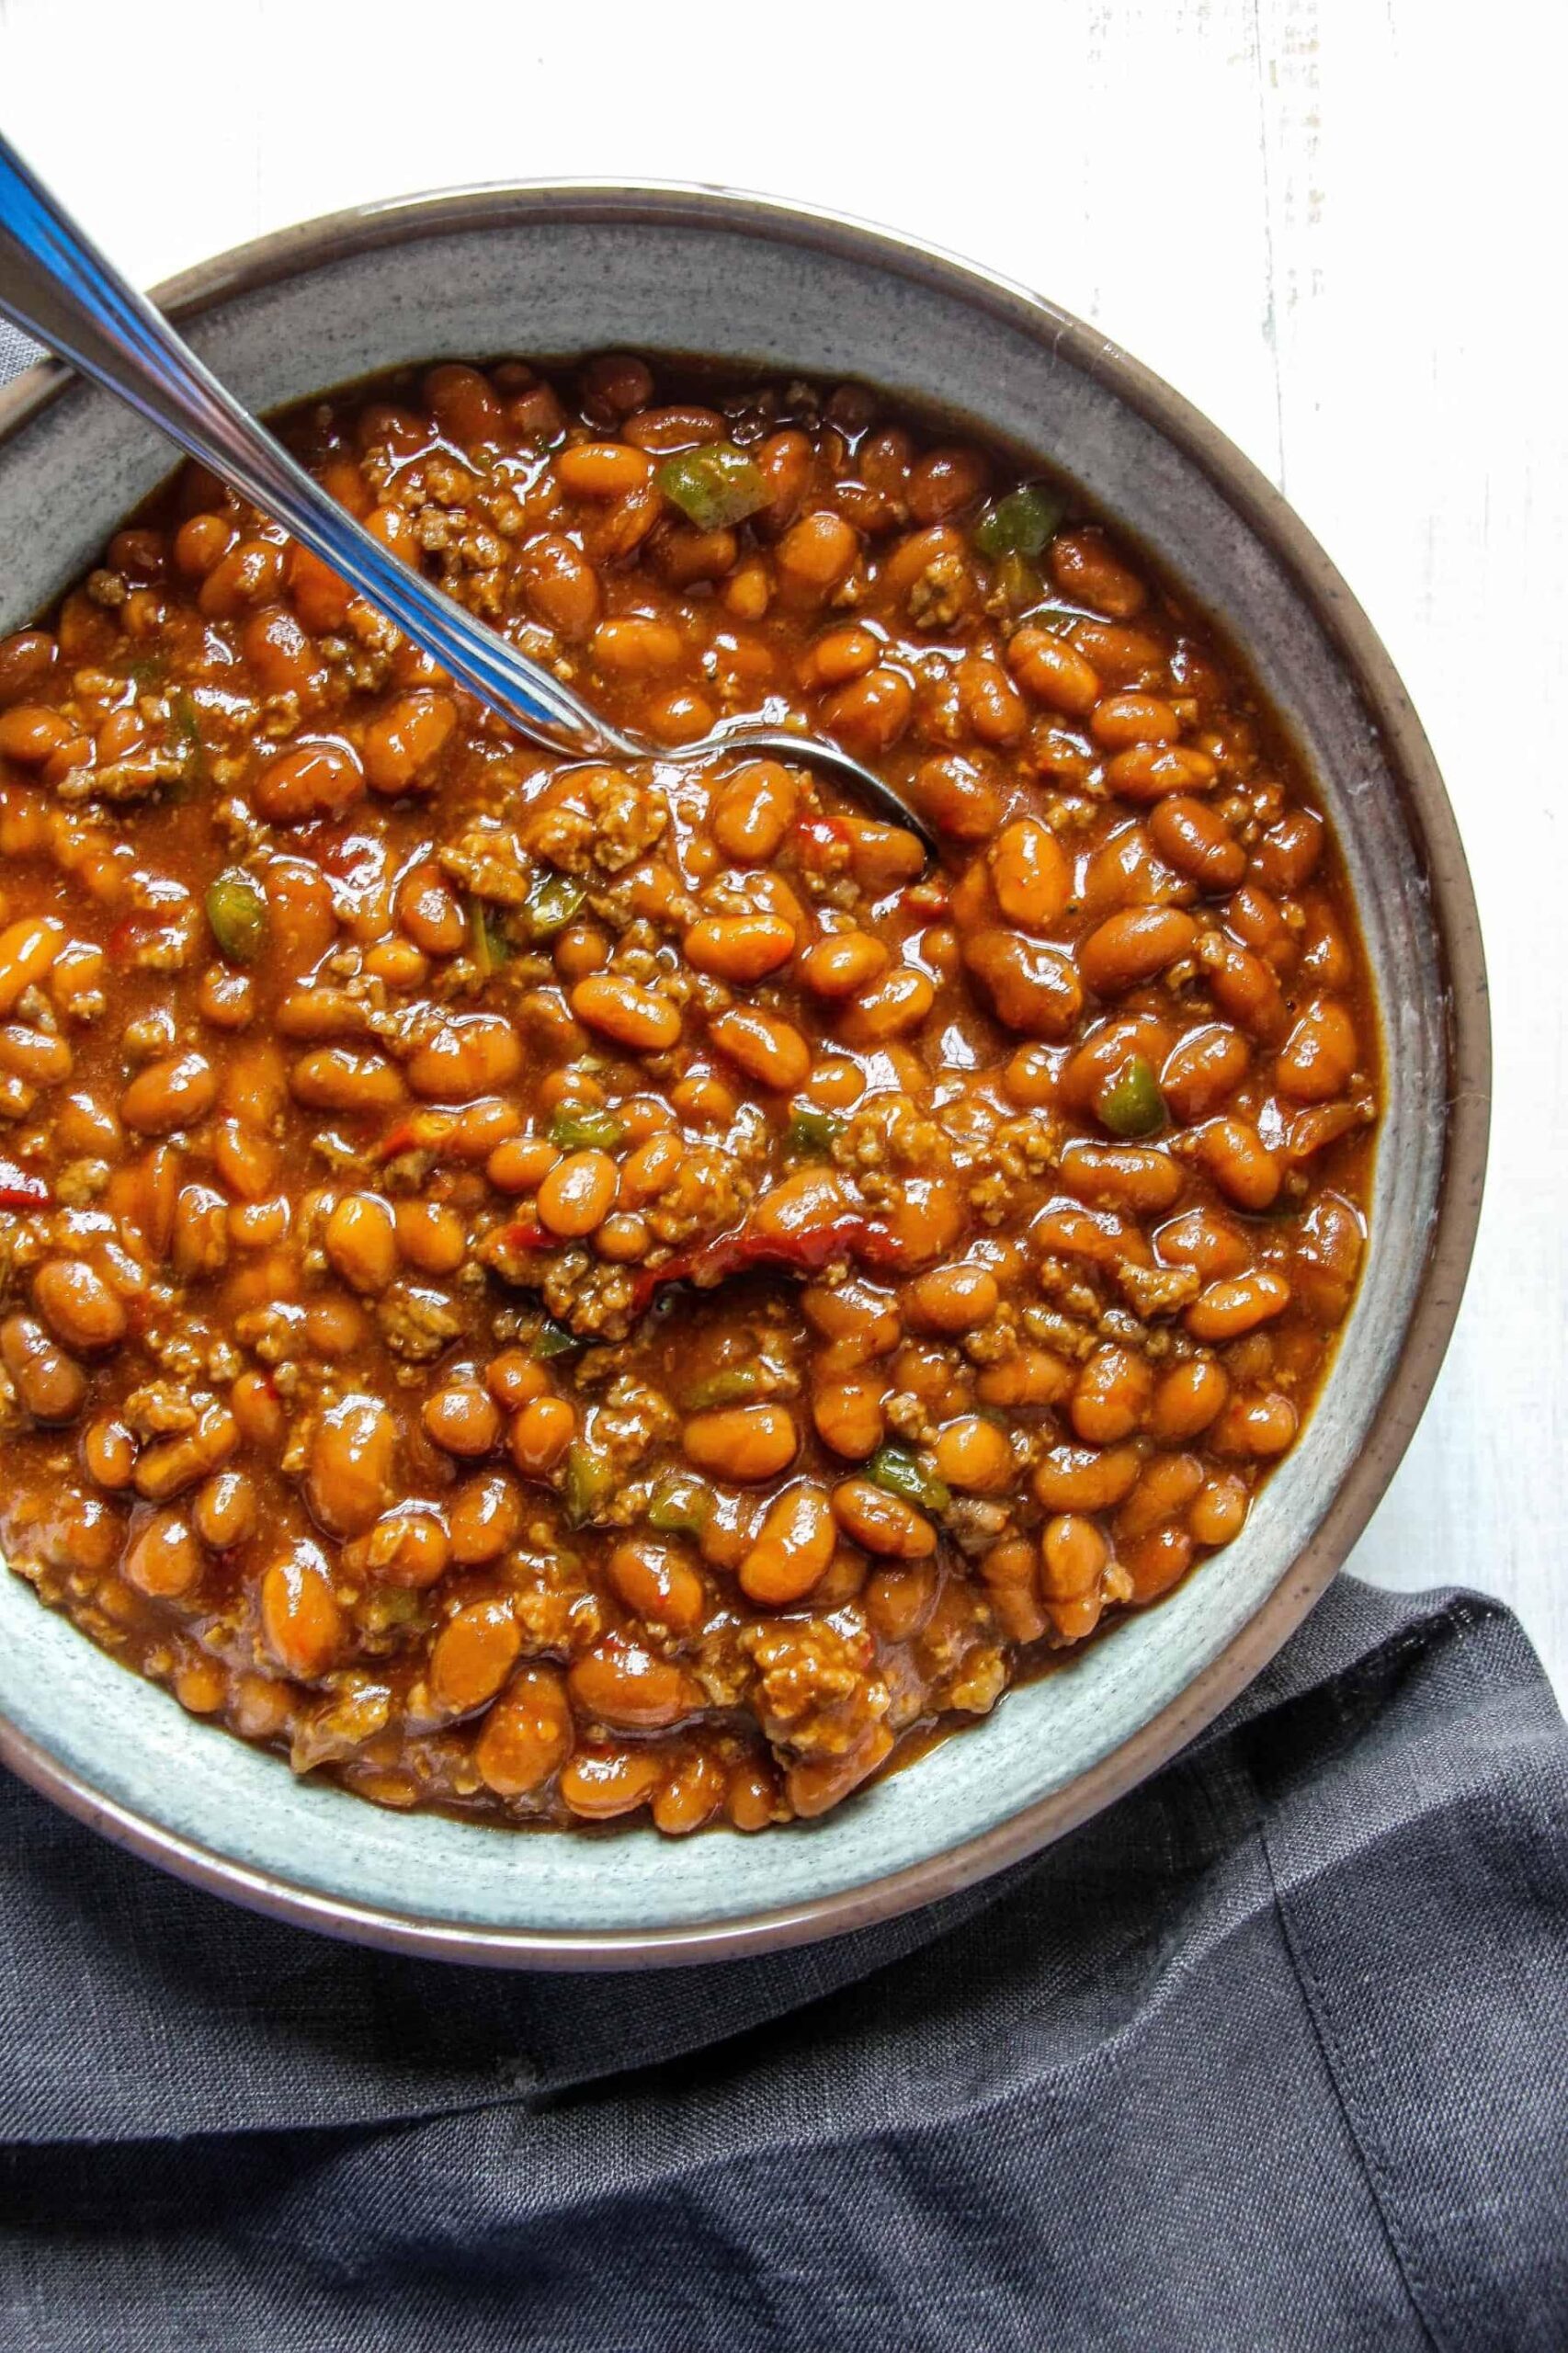  These beans are slow-cooked to perfection, allowing the flavors to meld together harmoniously.